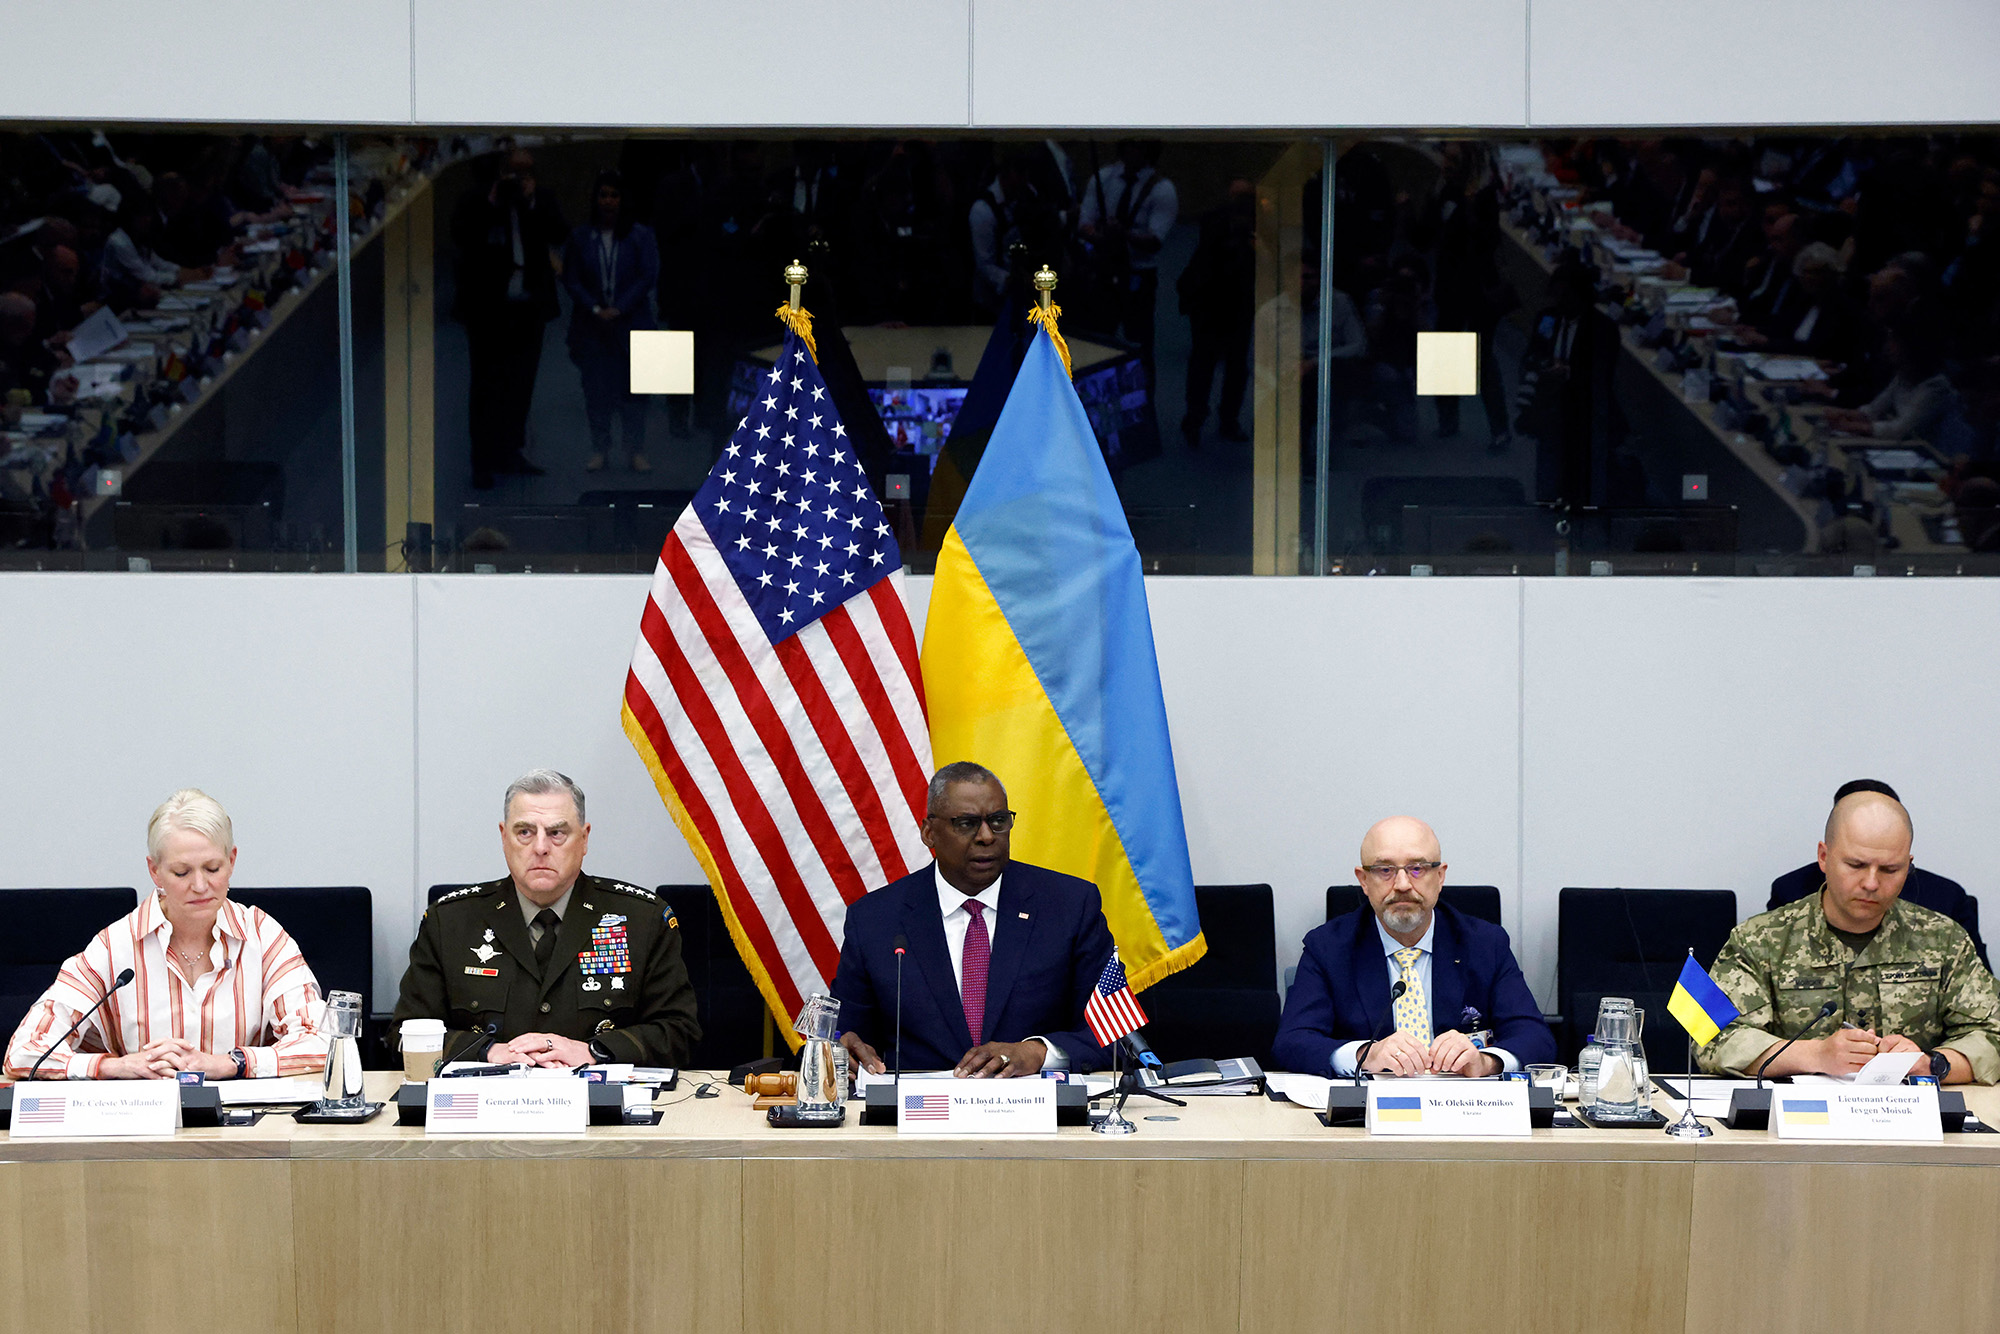 Left to right, U.S. Assistant Secretary of Defense for International Security Affairs Celeste A. Wallander, U.S. Chairman of the Joint Chiefs of Staff, General Mark Milley, U.S. Defense Secretary Lloyd Austin, Ukraine's Defence Minister Oleksii Reznikov and Ukrainian Lieutenant General Levgen Moisuk attend the Ukraine Defence Contact group meeting ahead of a NATO defence ministers' meeting at the alliance's headquarters in Brussels, Belgium, on June 15.